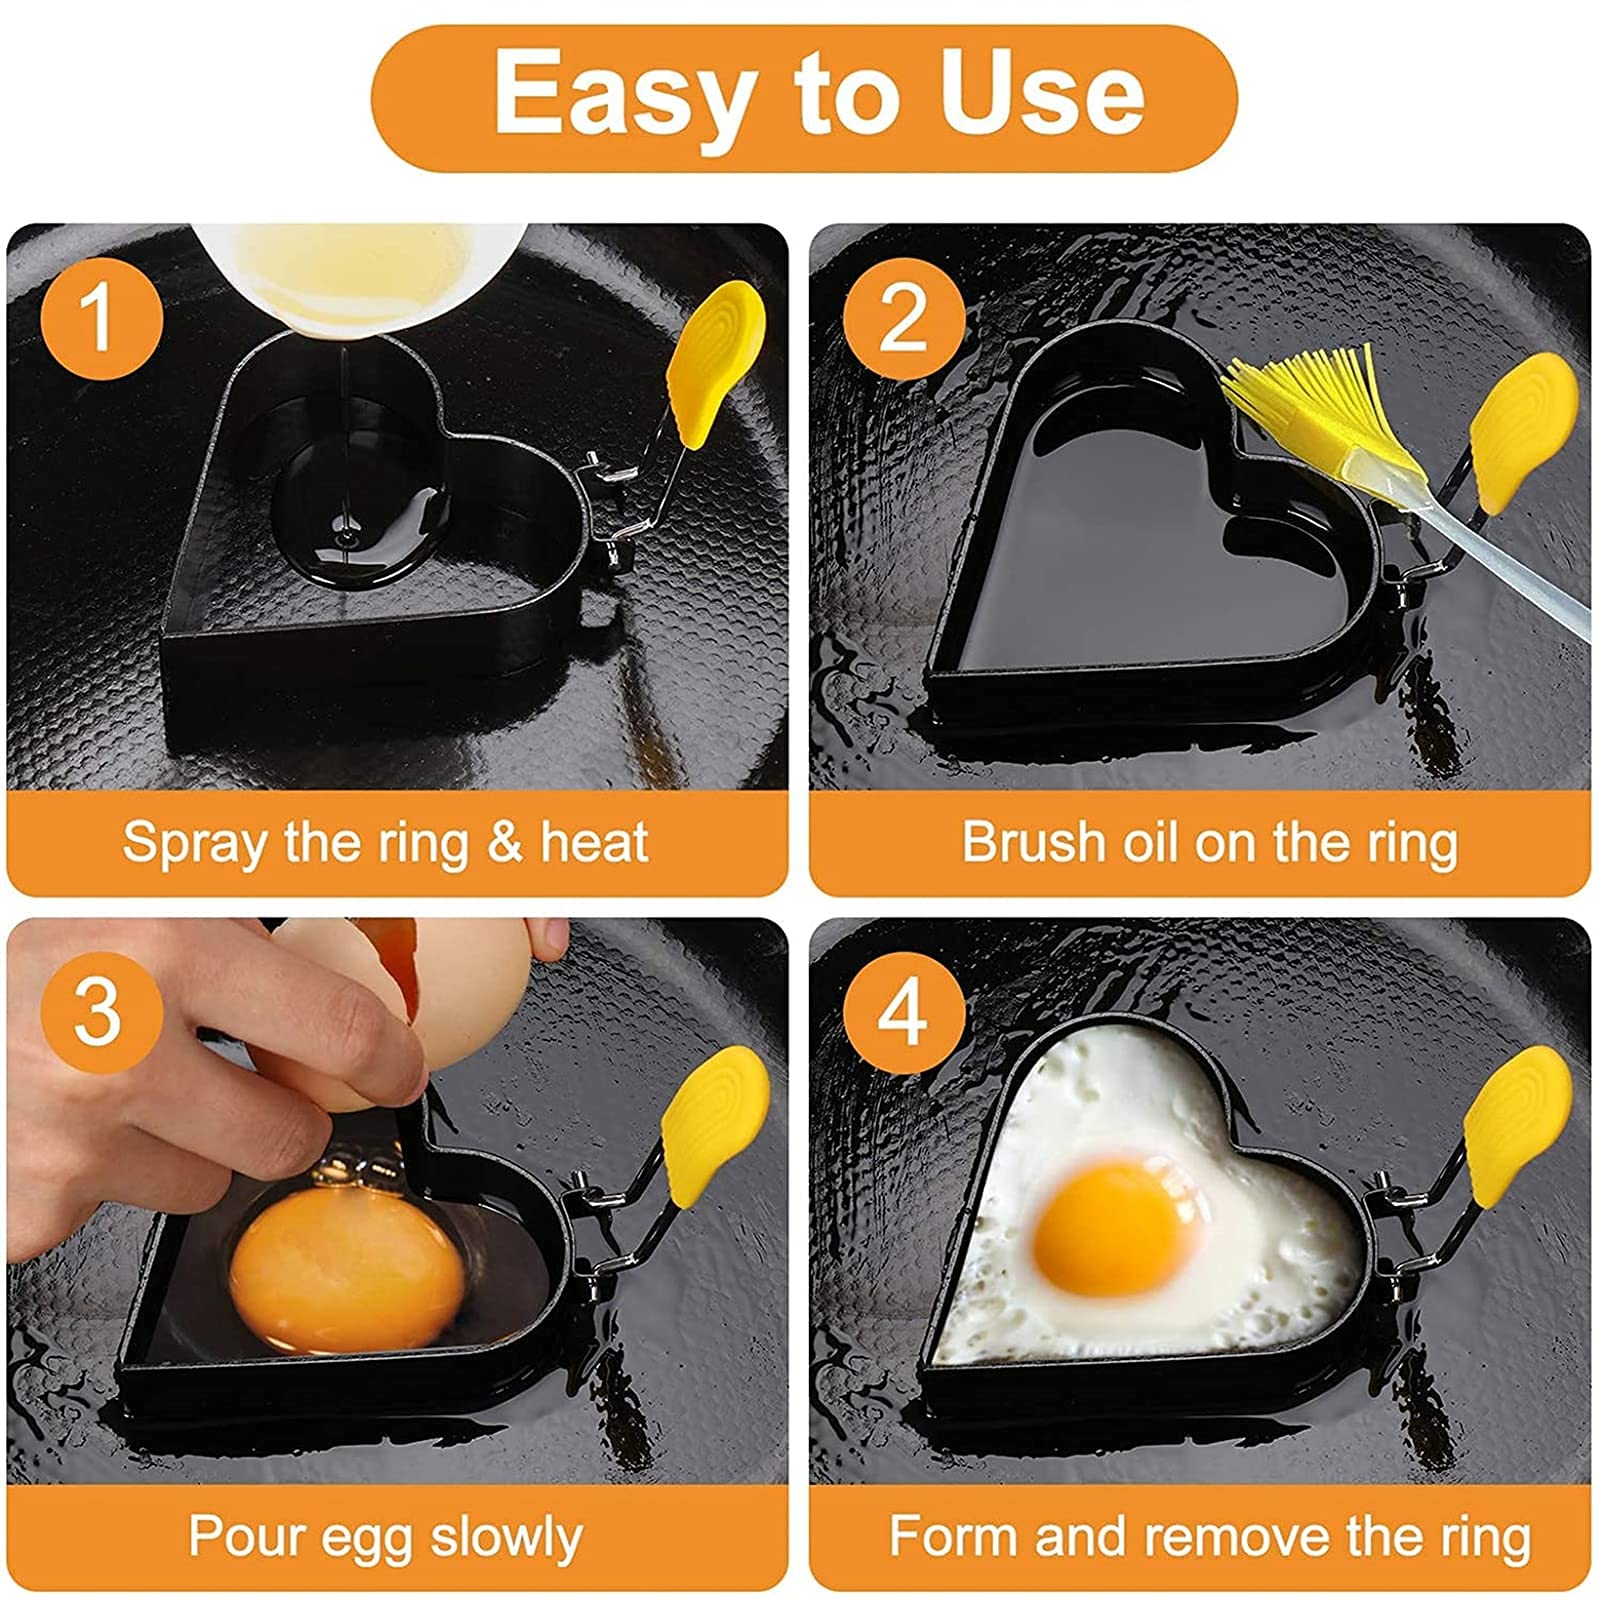 Egg Ring for Frying Eggs, Stainless Steel Egg Cooking Rings with Anti-scald Handle, Non-stick Egg Shaper Molds for Omelet, Breakfast Tool for Pancake, Sandwich Burger, Crumpet Ring–4 Different Shapes